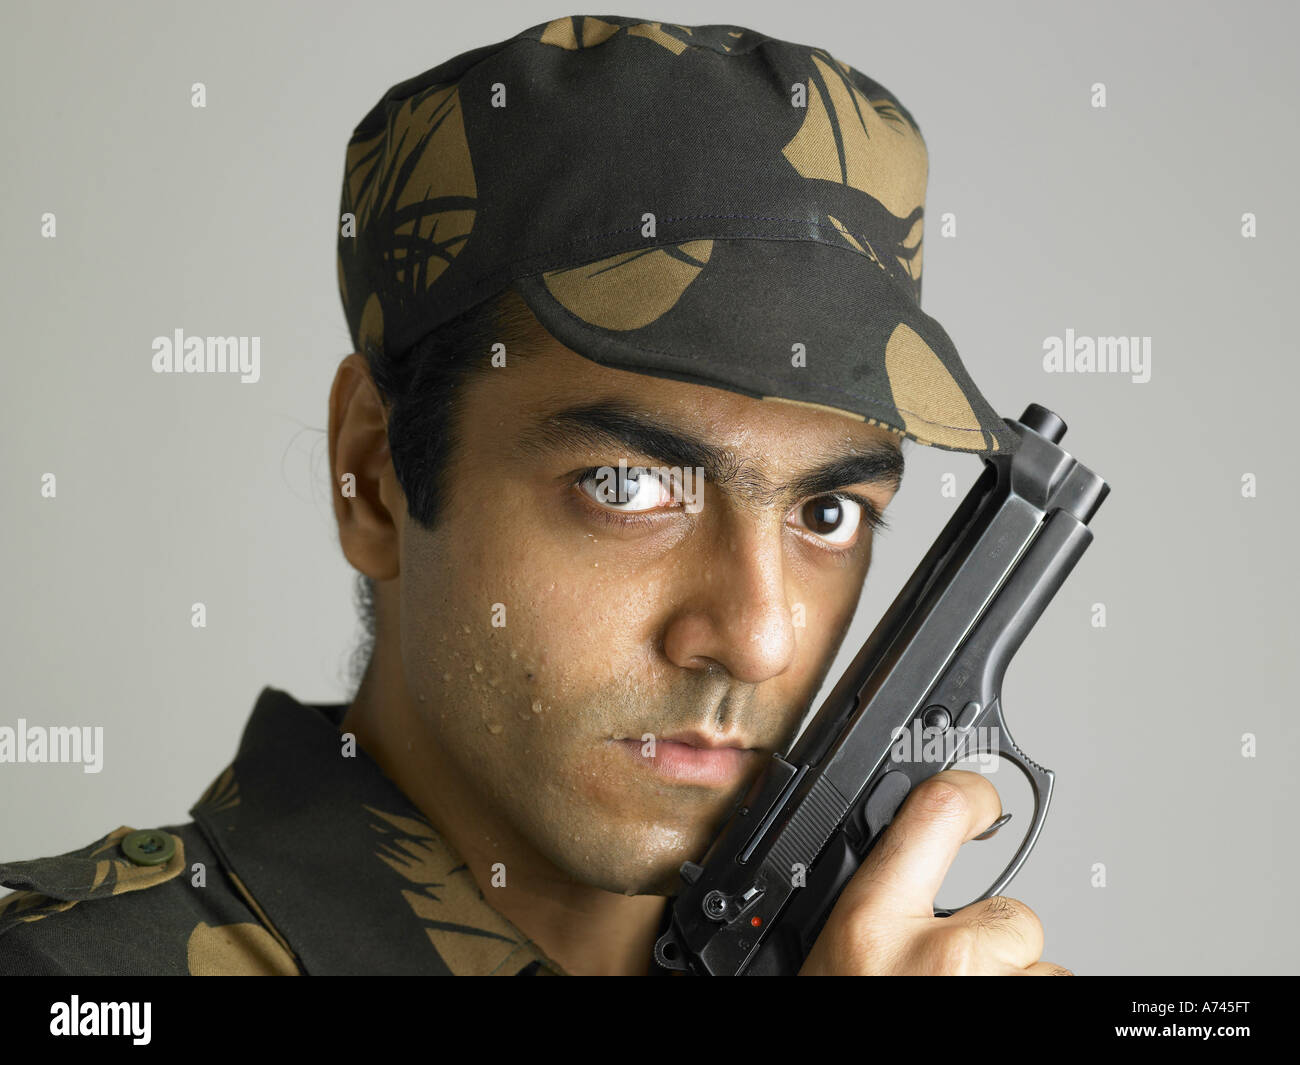 VDA 201755 Indian army soldier in angry expression holding handgun MR 702A Stock Photo